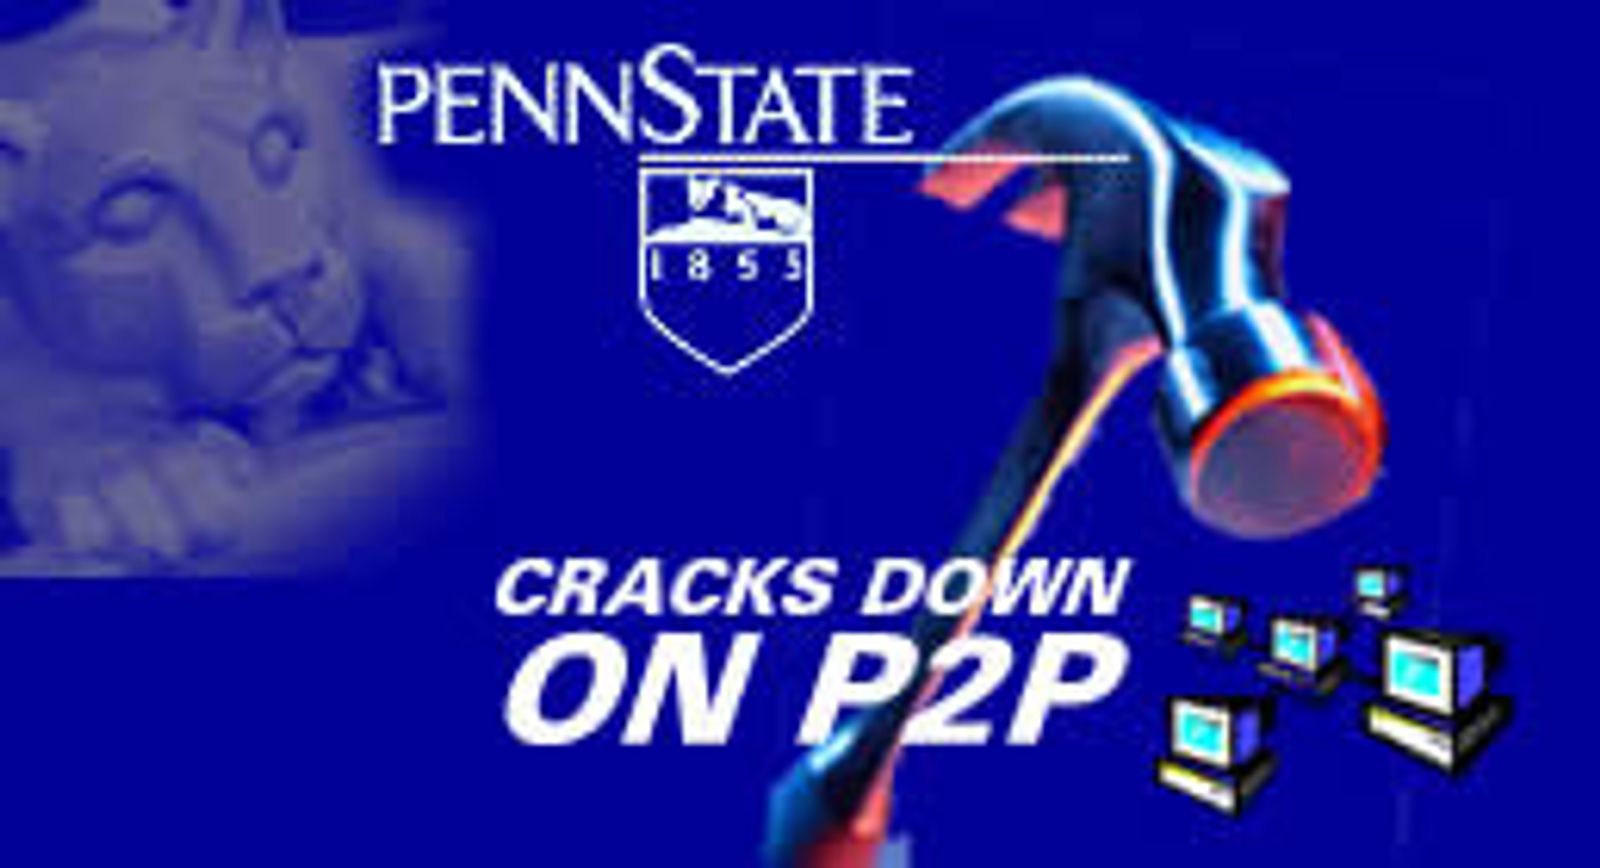 Penn State Cracking Down On P2P Swapping